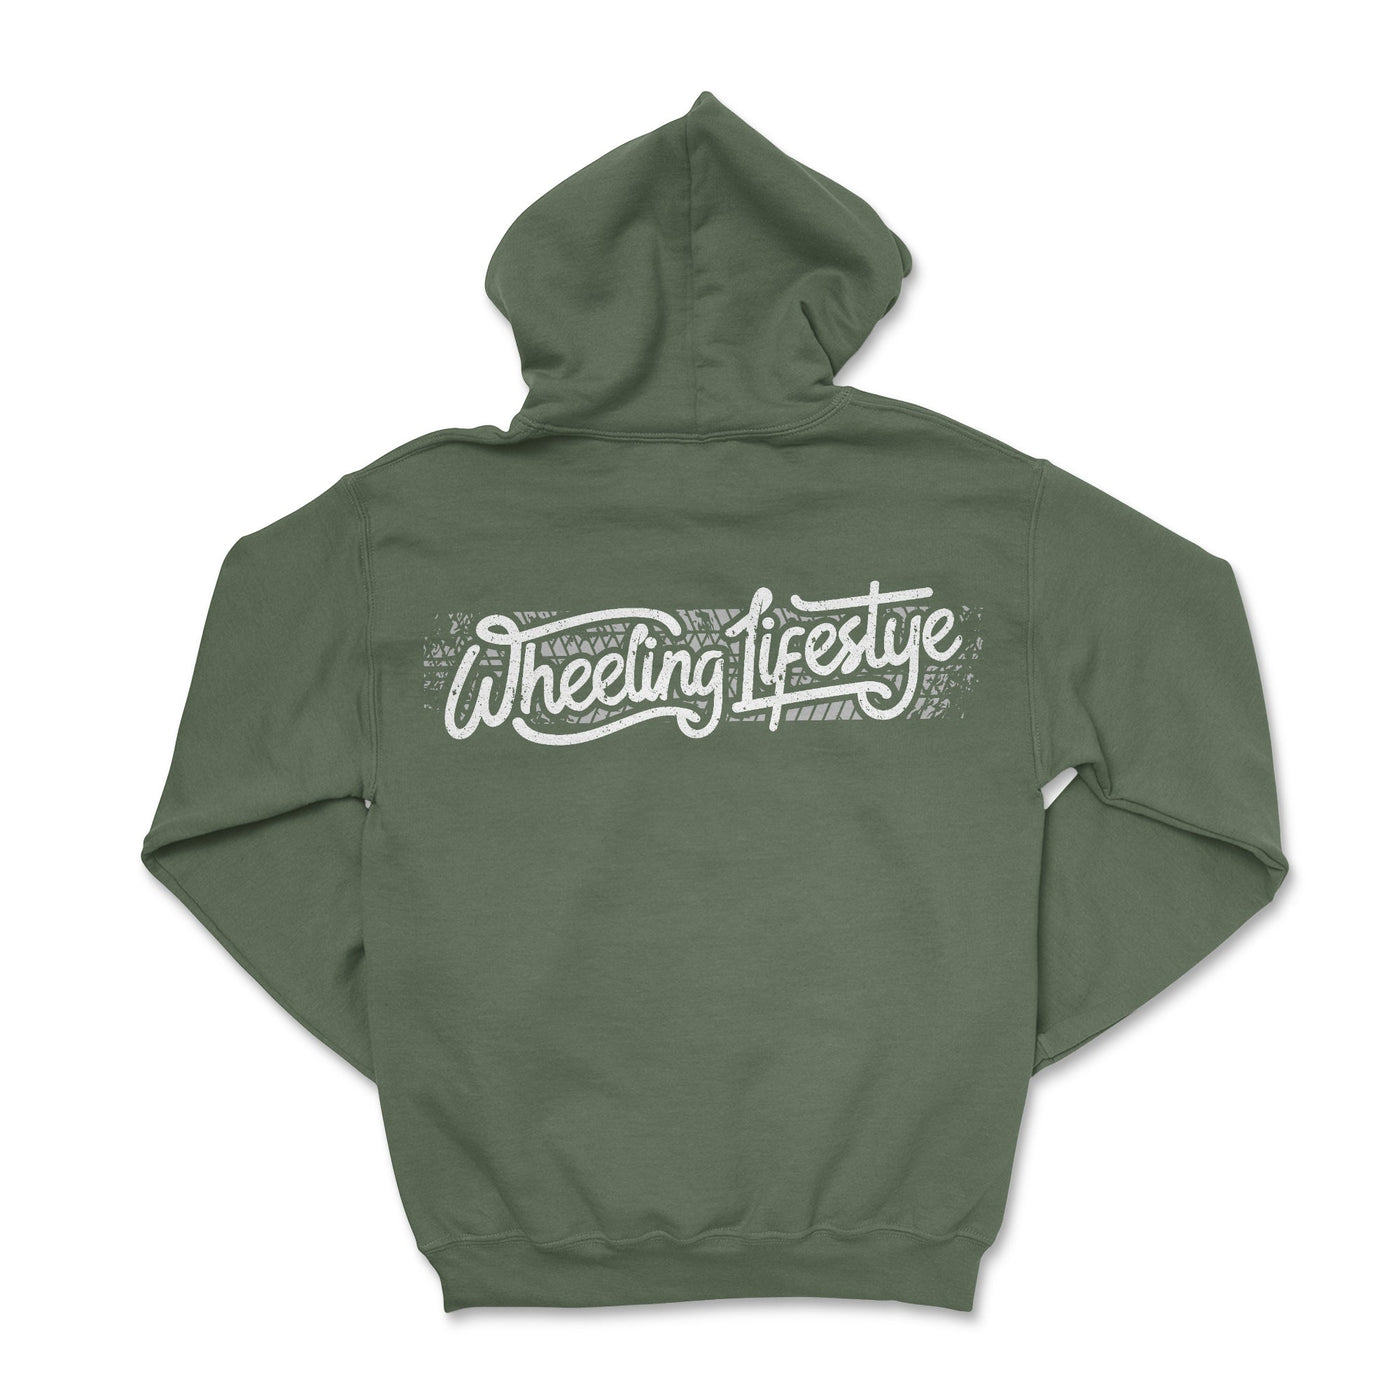 Wheeling Lifestyle Hoodie-Adventure Ready Apparel - Goats Trail Off-Road Apparel Company